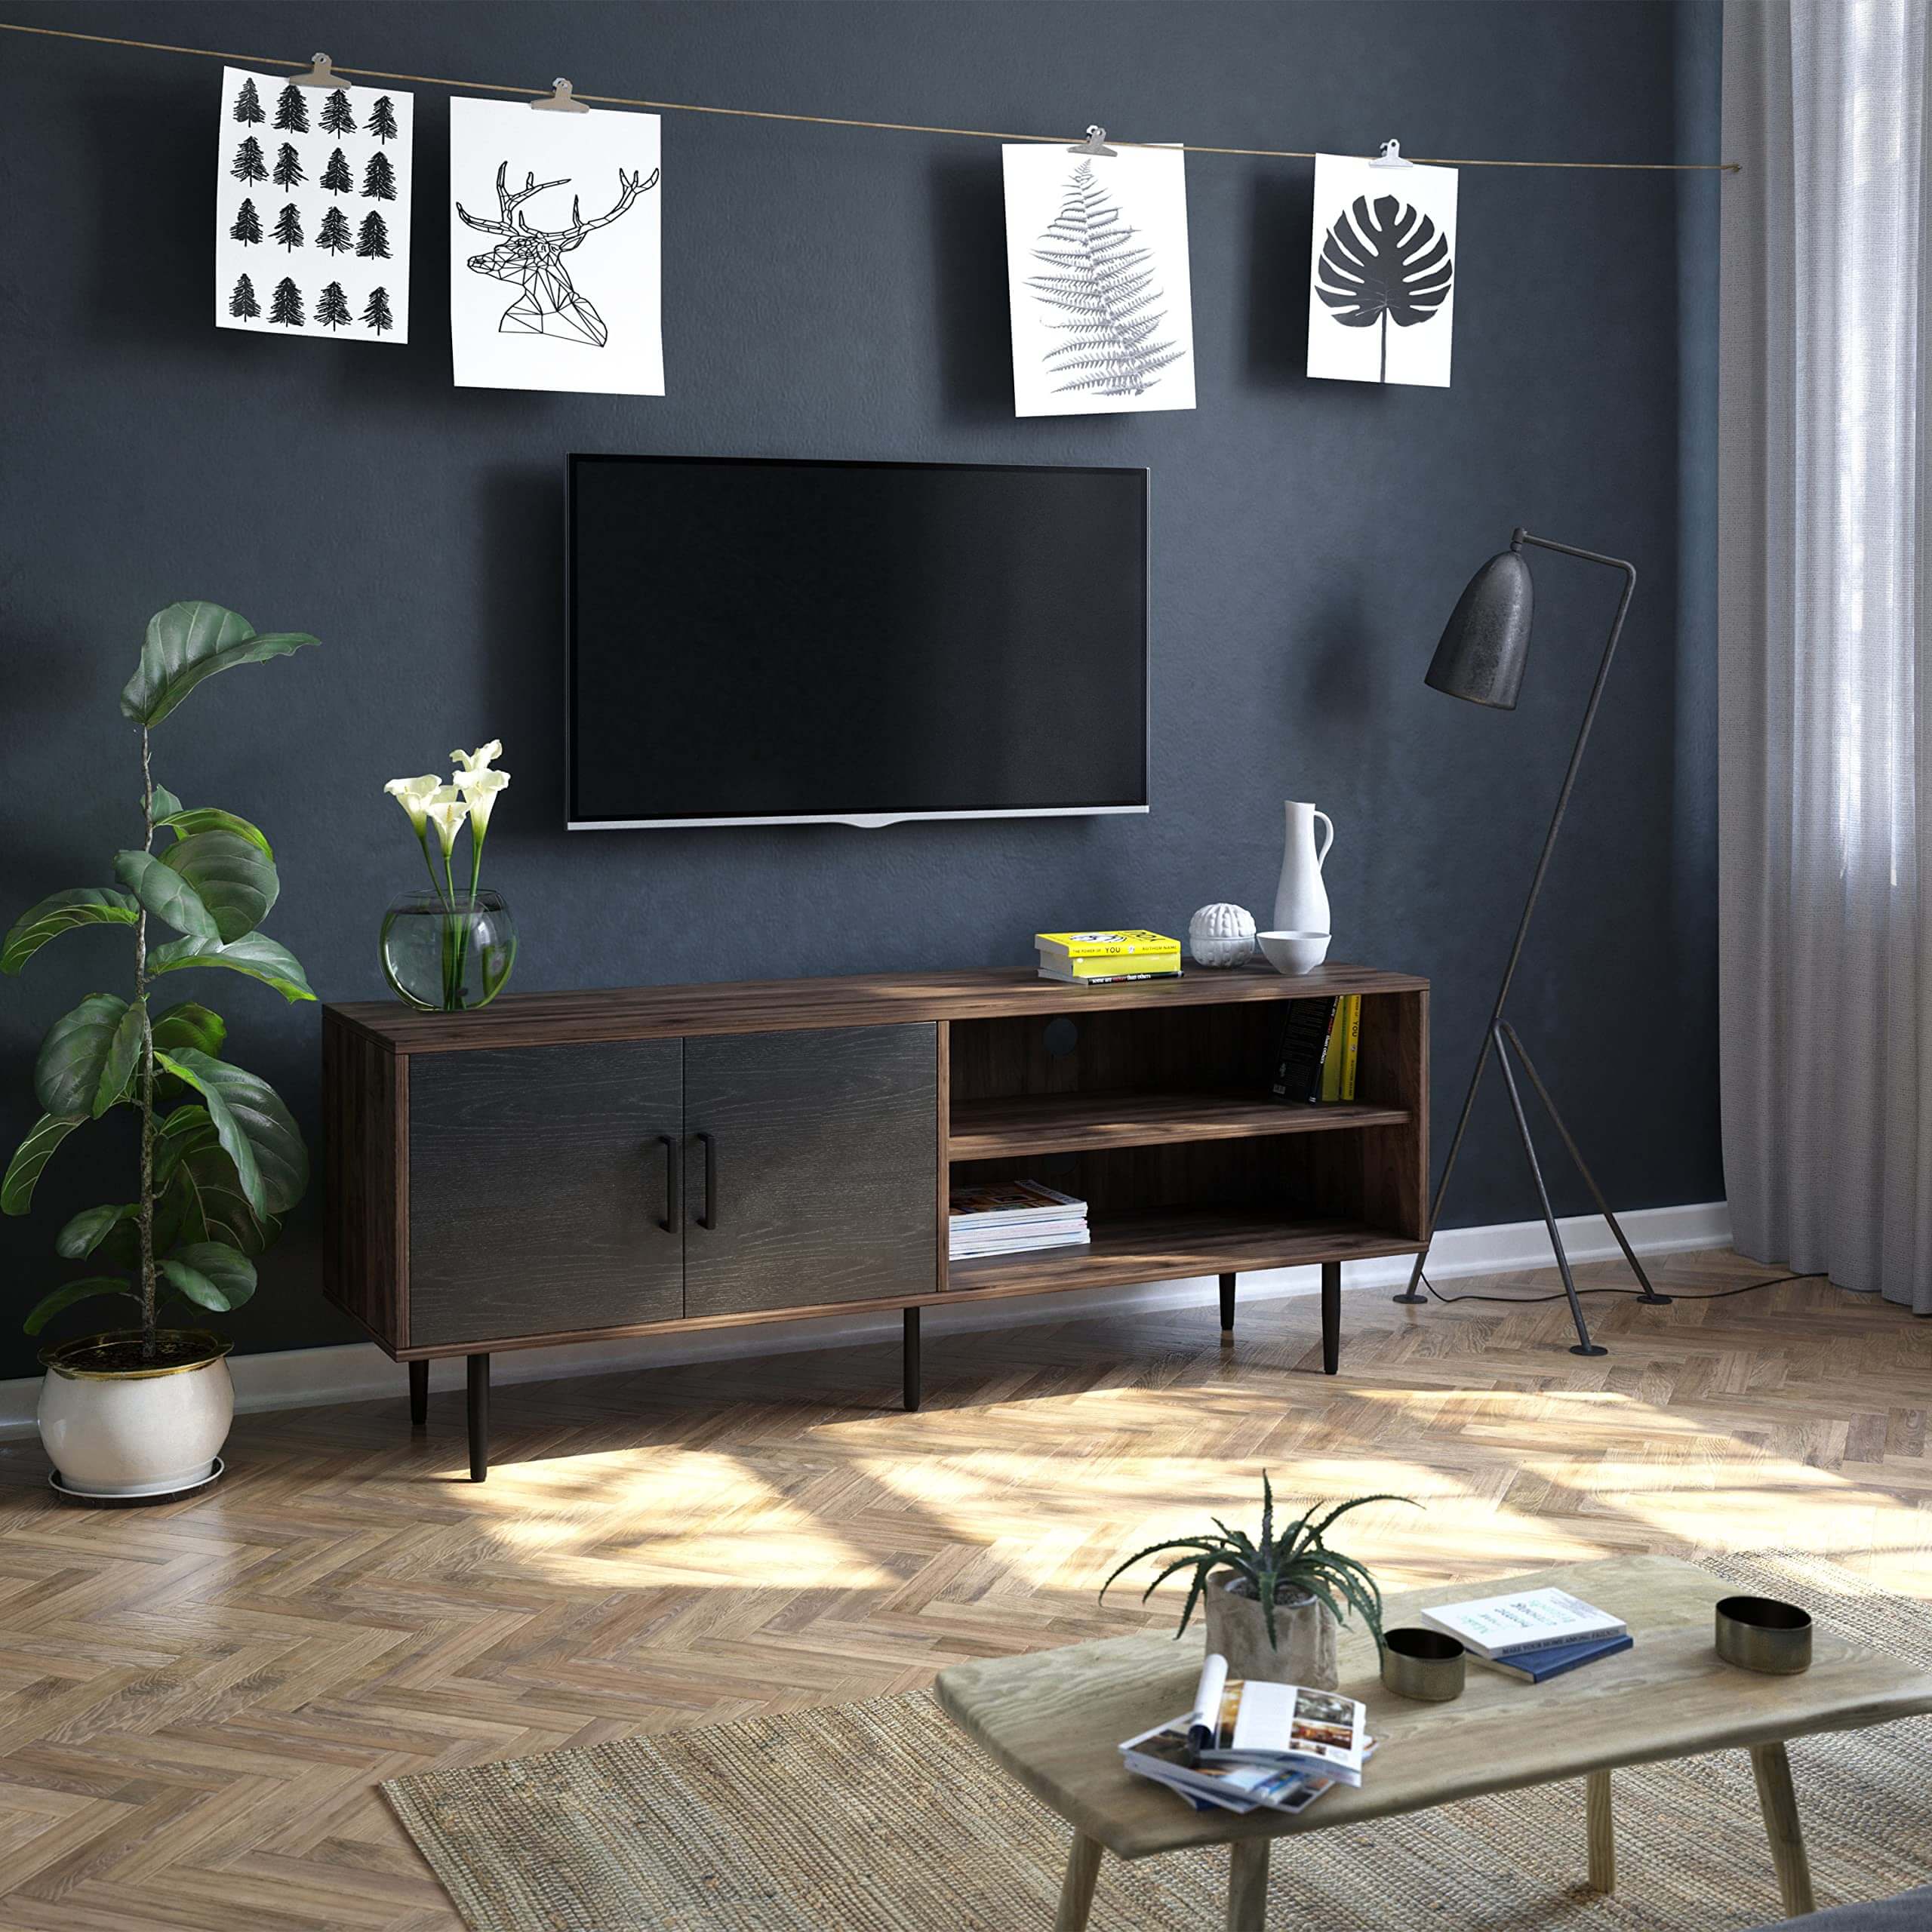 Concise TV Stand with Storage Cabinets